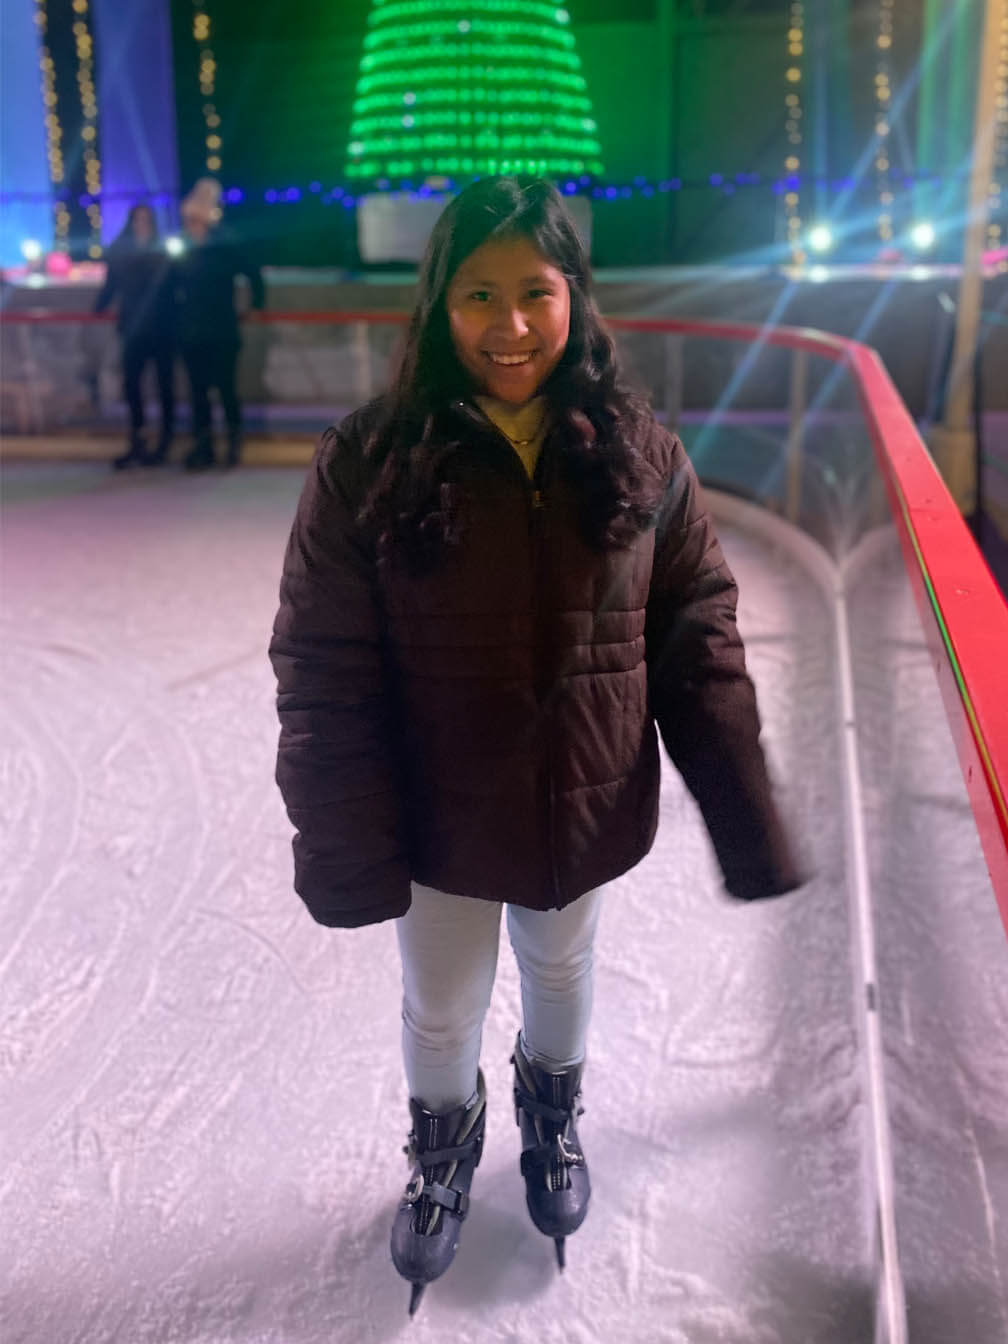 Axlin had a great time ice skating